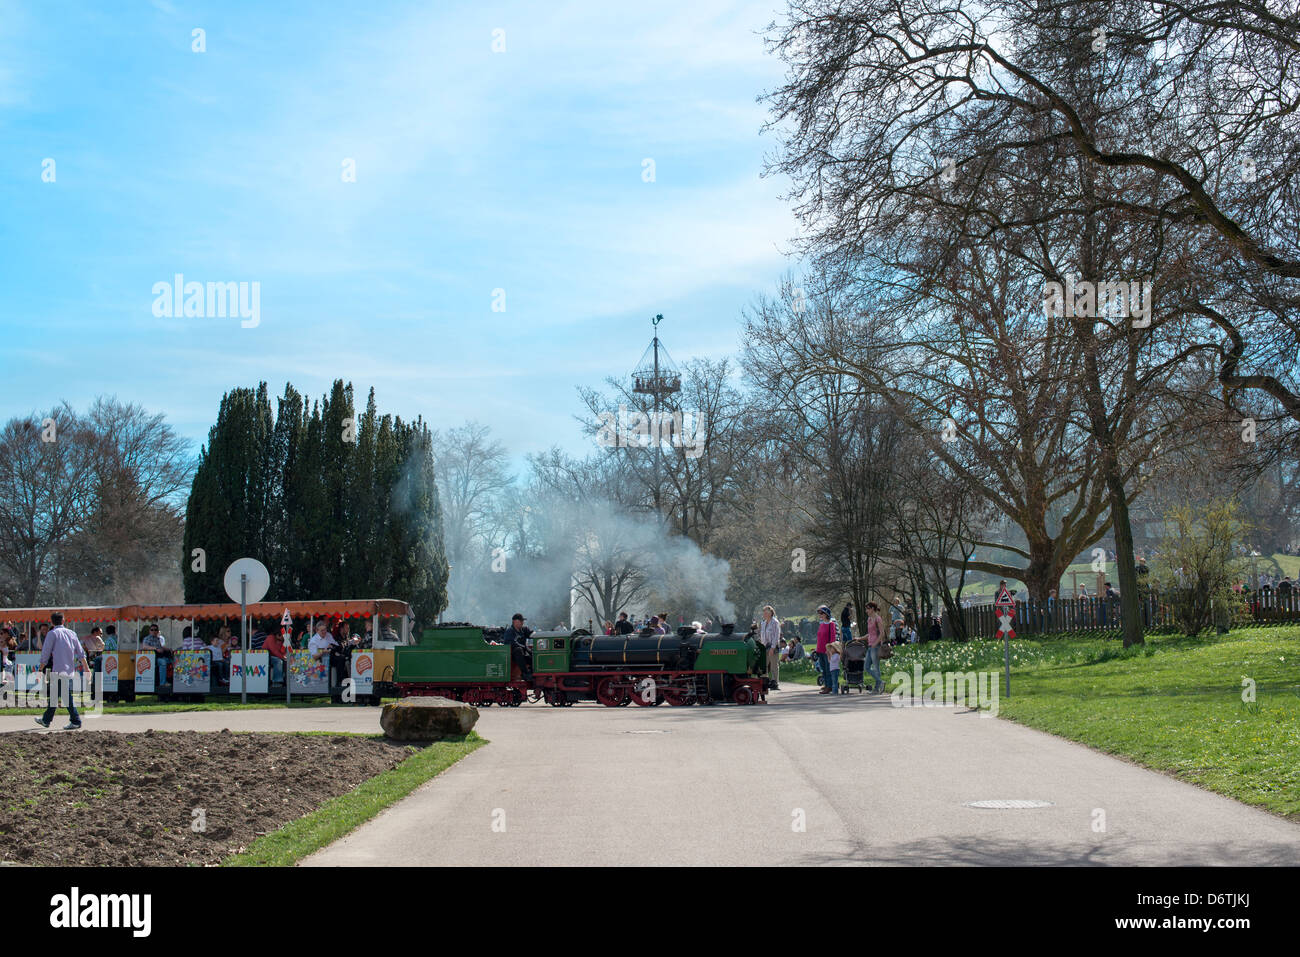 People are enjoying the first sunny spring day in Killesberg Park in Stuttgart, Germany on April 14, 2013. Stock Photo